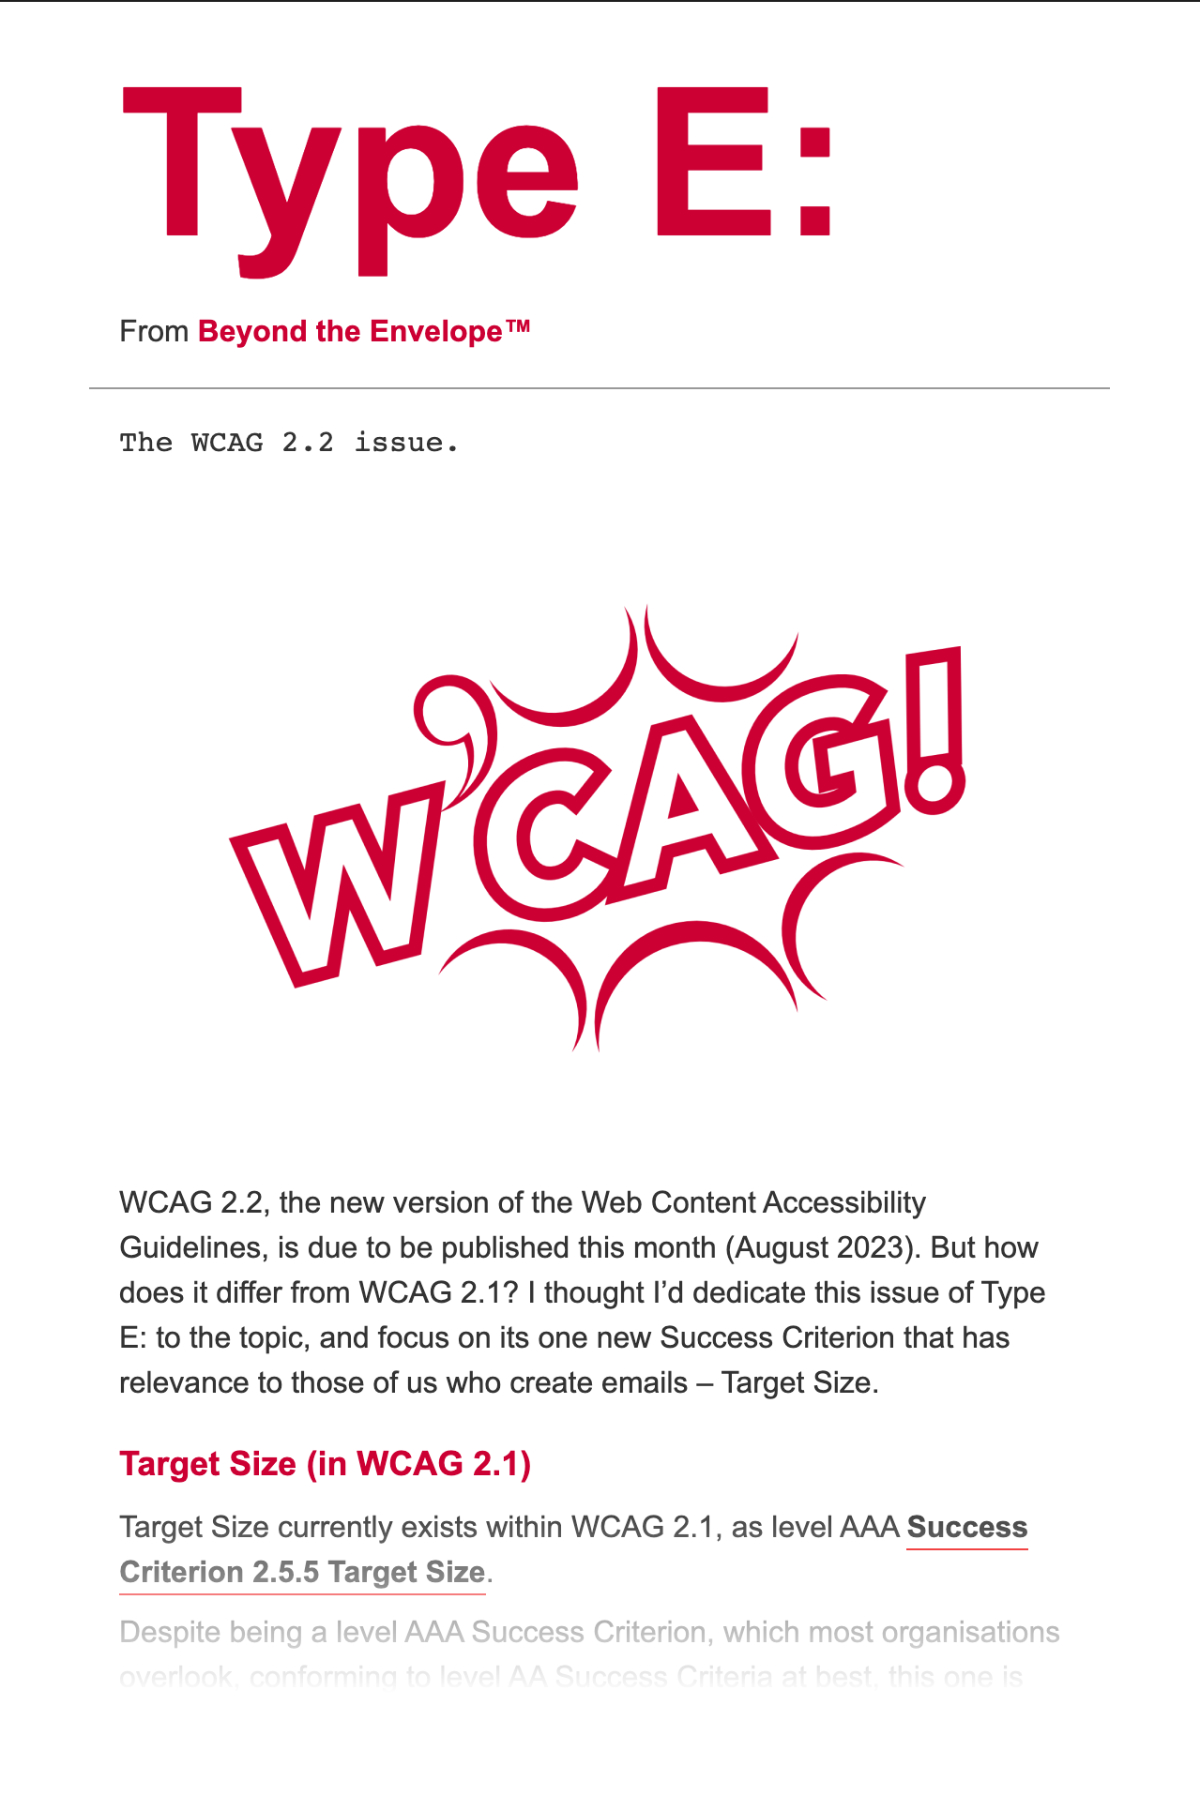 Type E: The WCAG 2.2 Issue